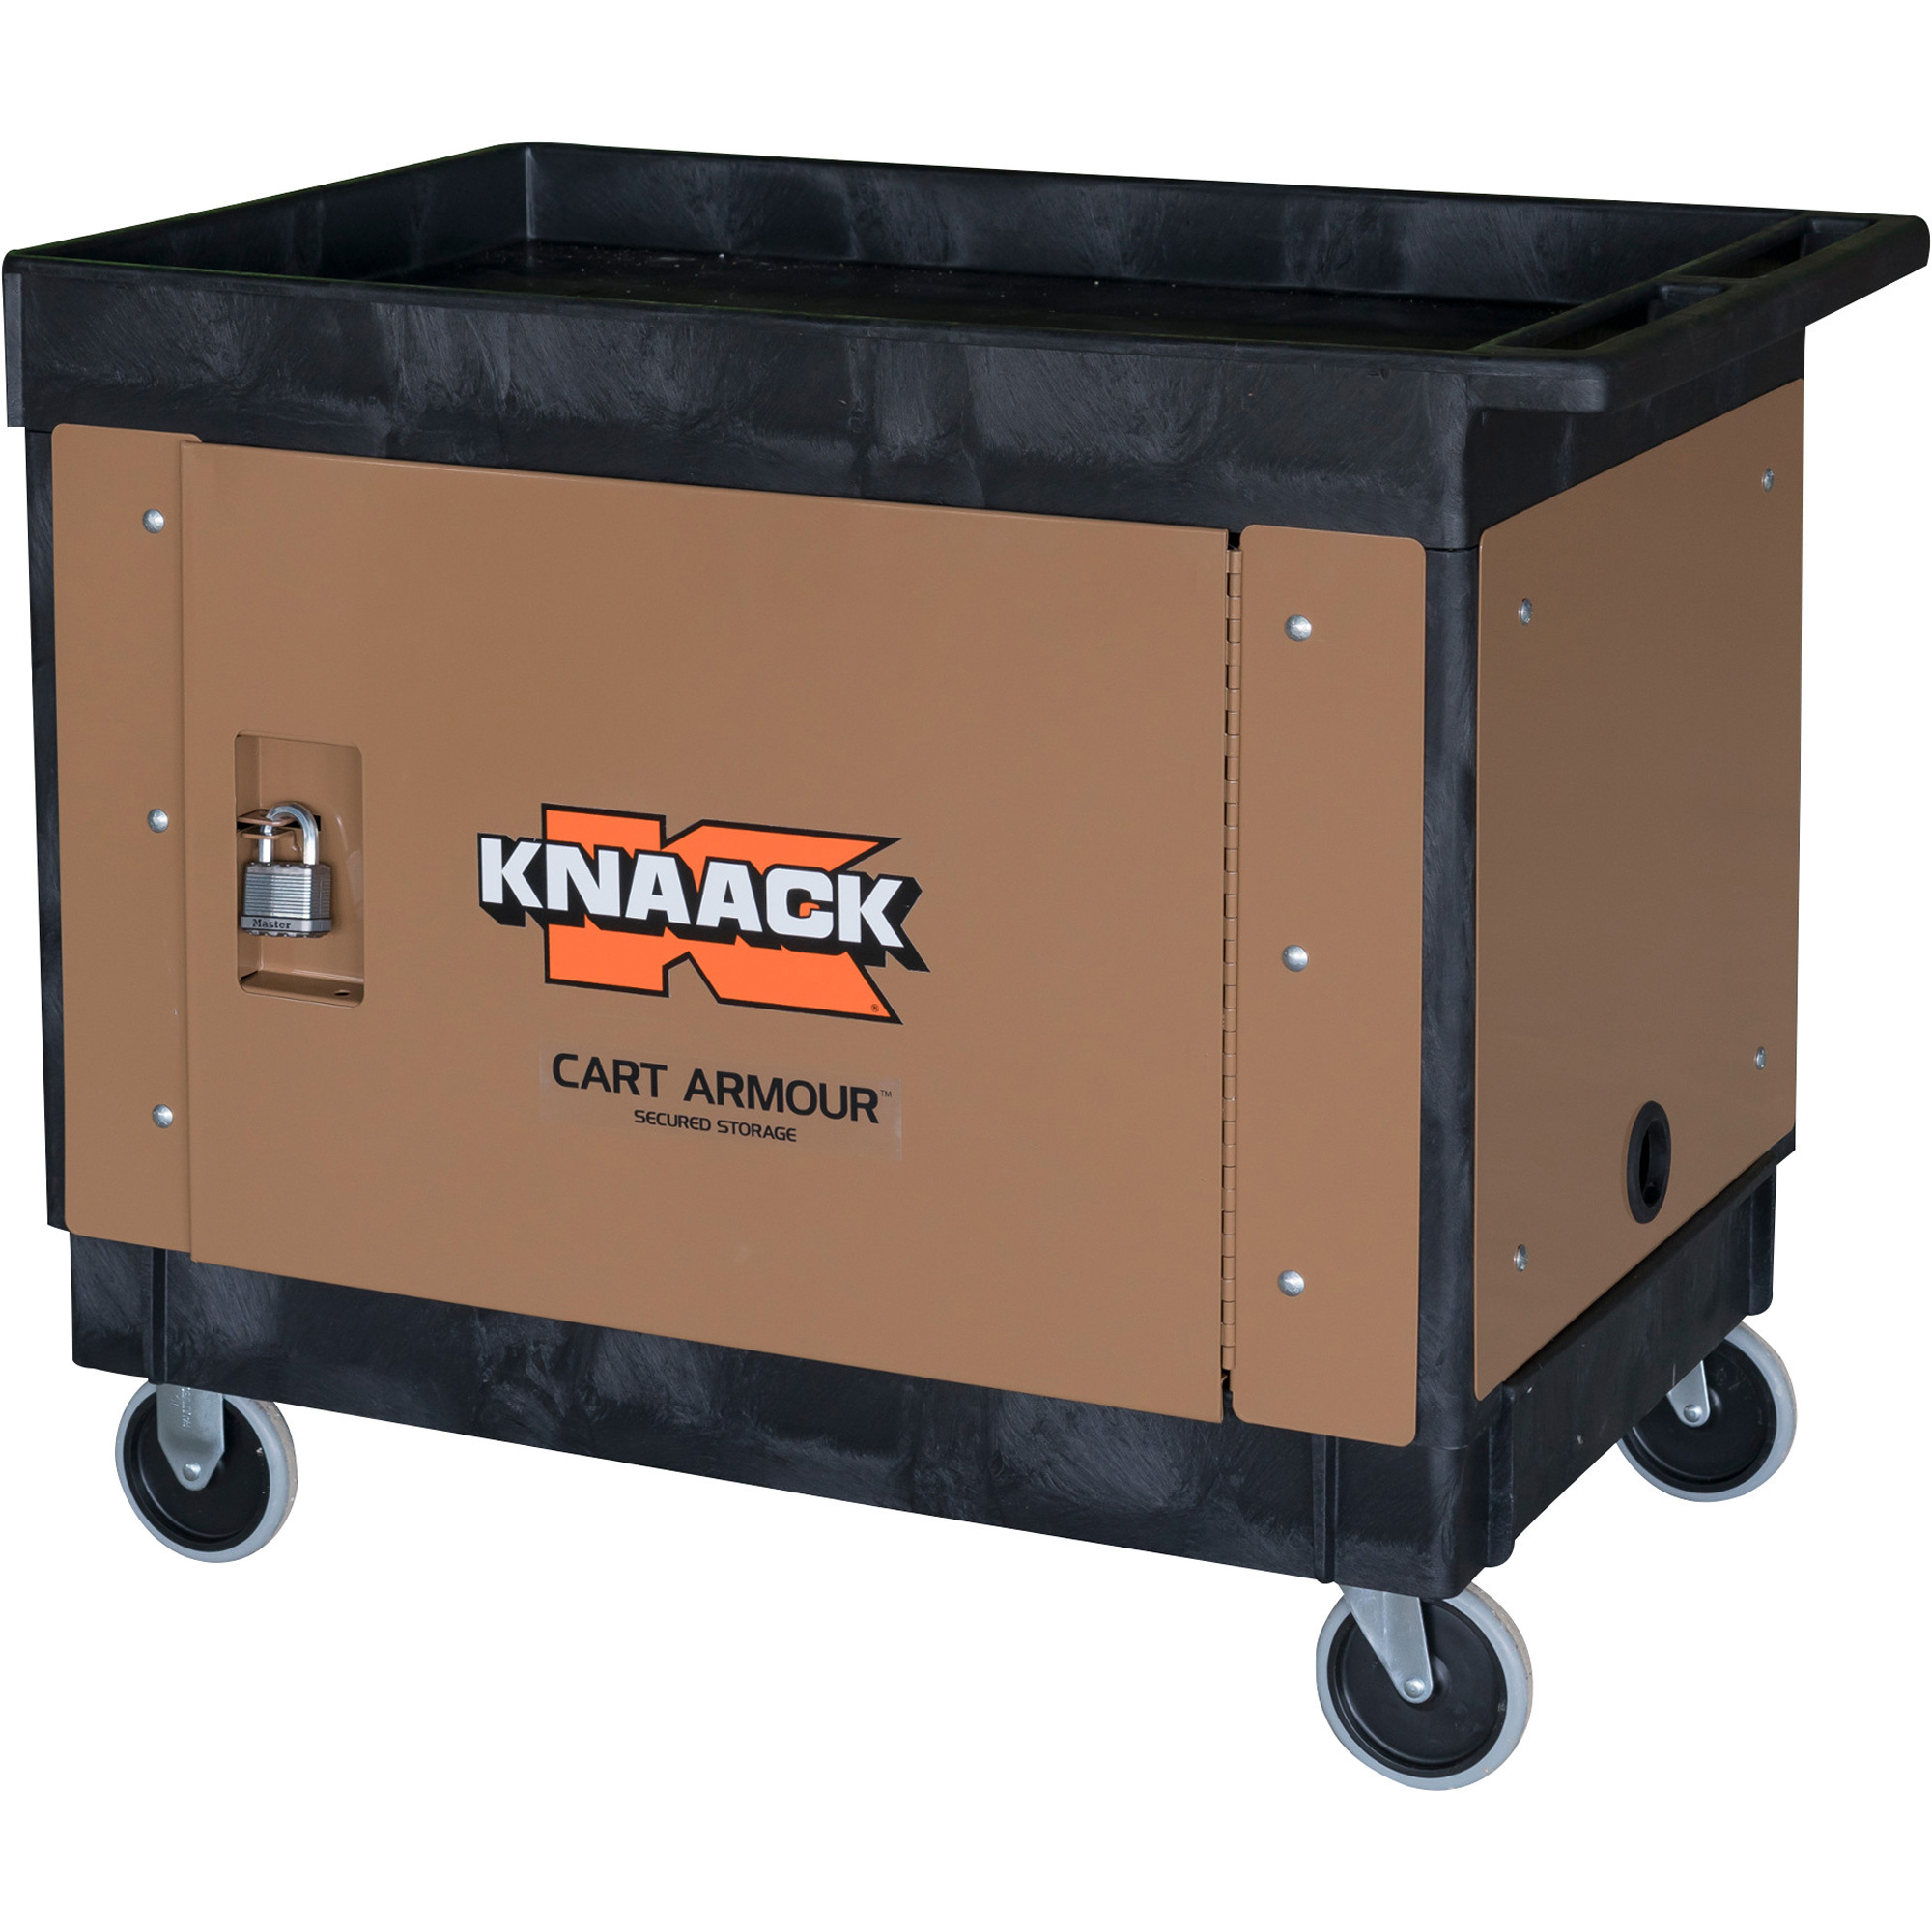 KNAACK Cart Armour Mobile Cart Security Paneling, Fits Rubbermaid Cart 9T67-00, Model CA-03